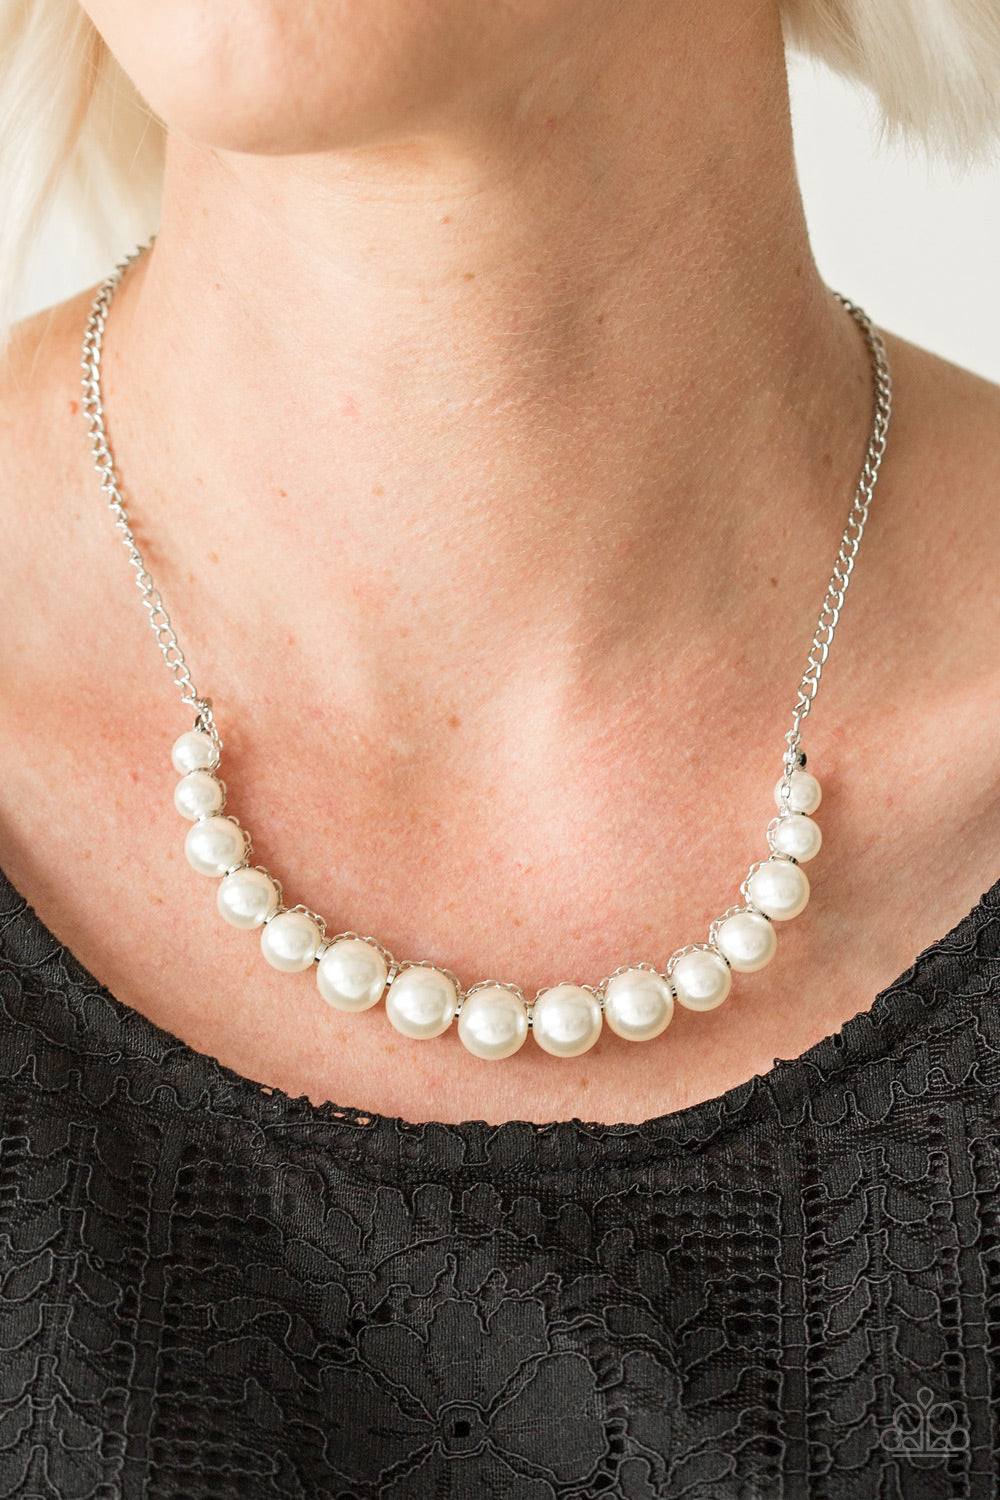 The Fashion Show Must Go On - white - Paparazzi necklace